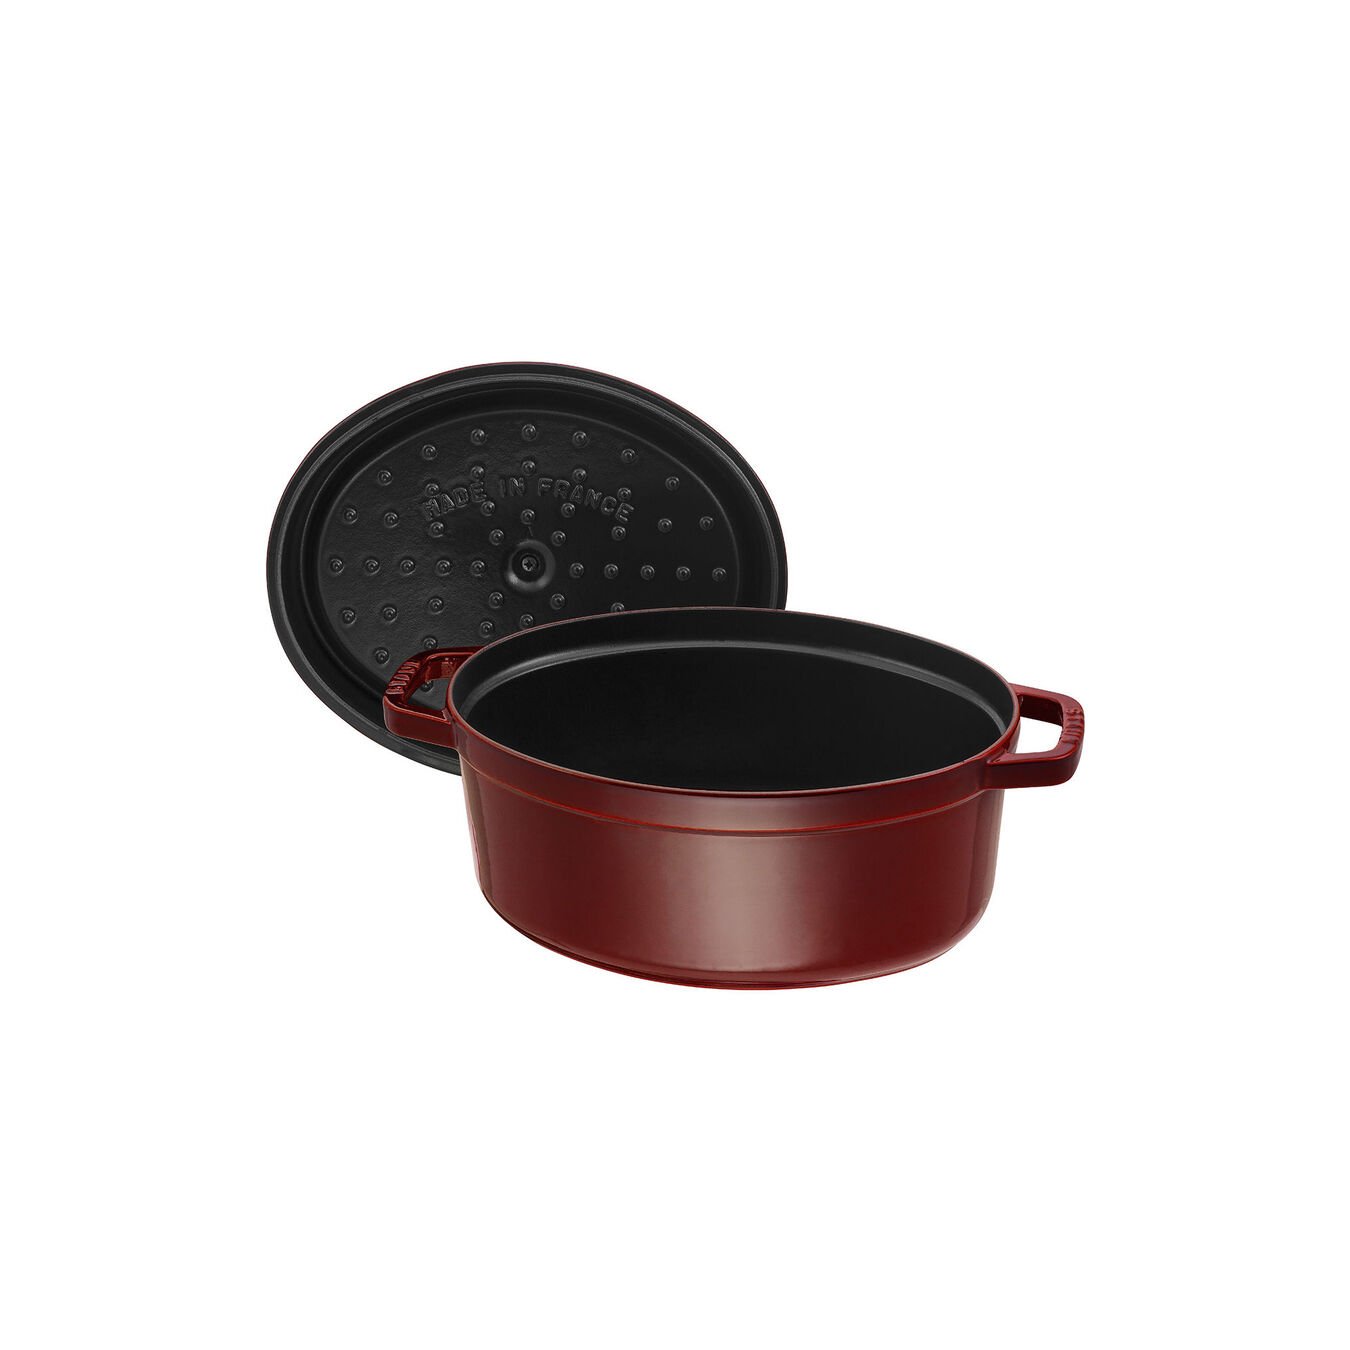 31 cm oval Cast iron Cocotte grenadine-red,,large 3